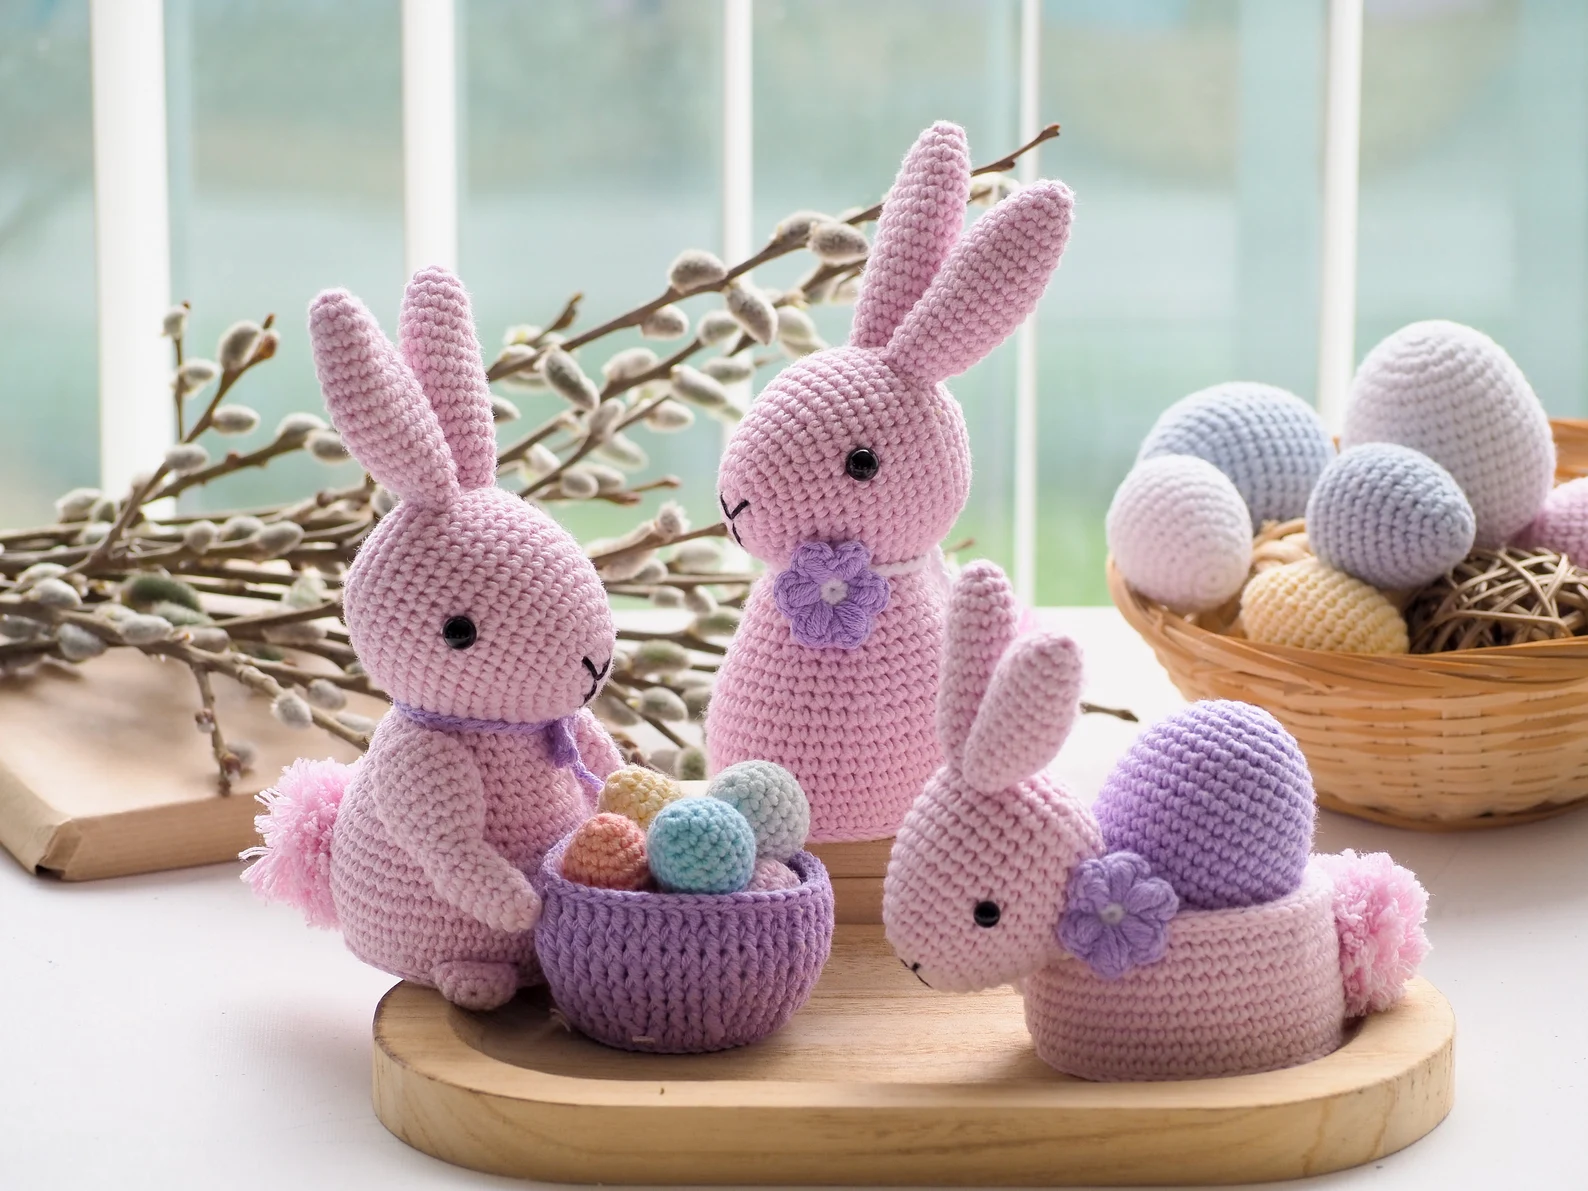 Crochet Easter Decorations from RNata